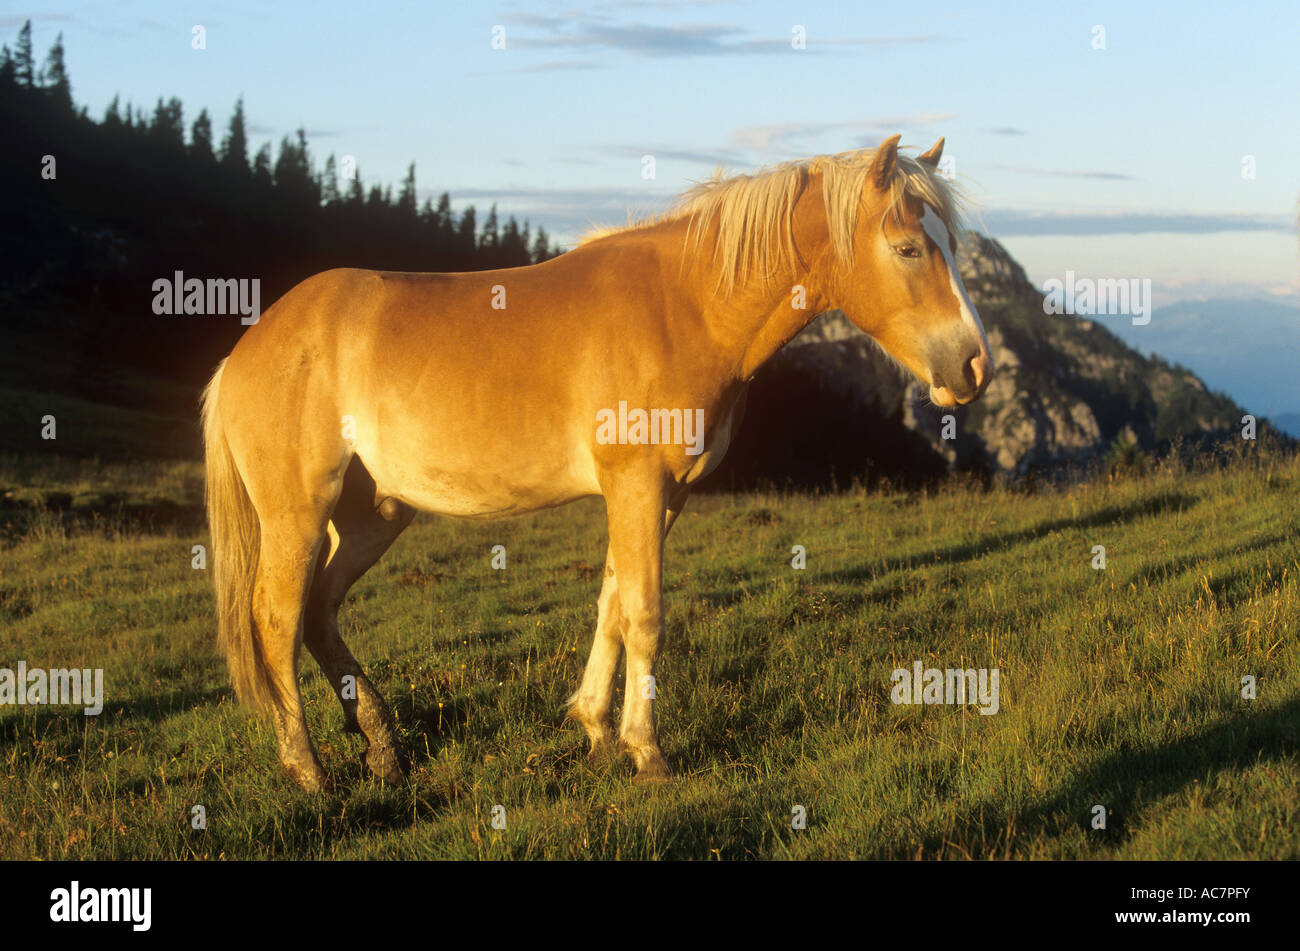 Haflinger - standing on meadow Banque D'Images